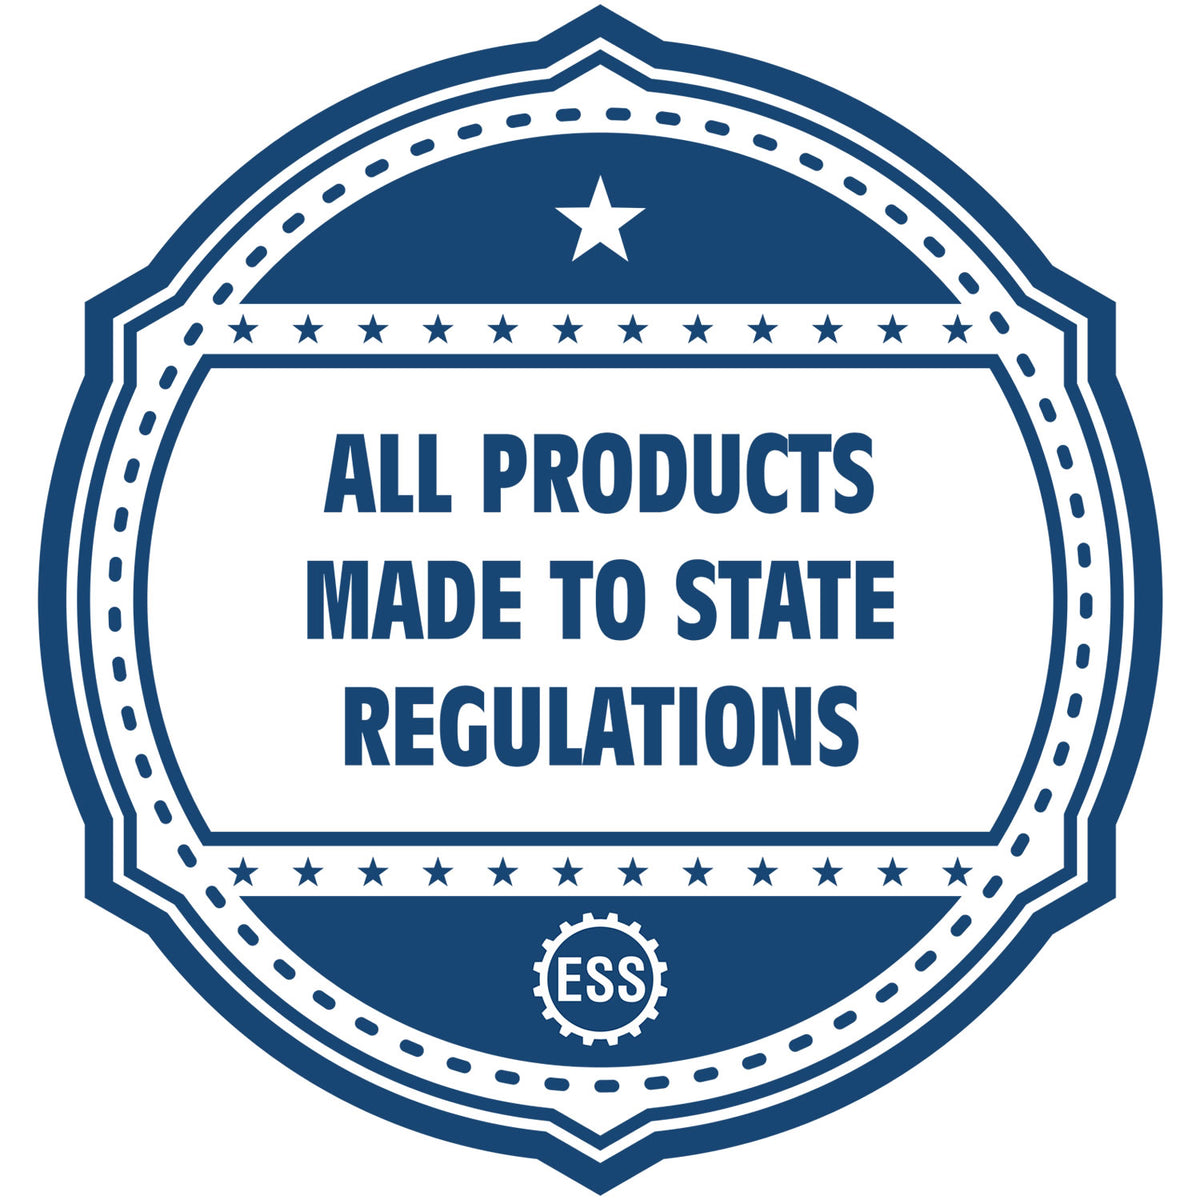 An icon or badge element for the MaxLight Premium Pre-Inked Kansas State Seal Notarial Stamp showing that this product is made in compliance with state regulations.